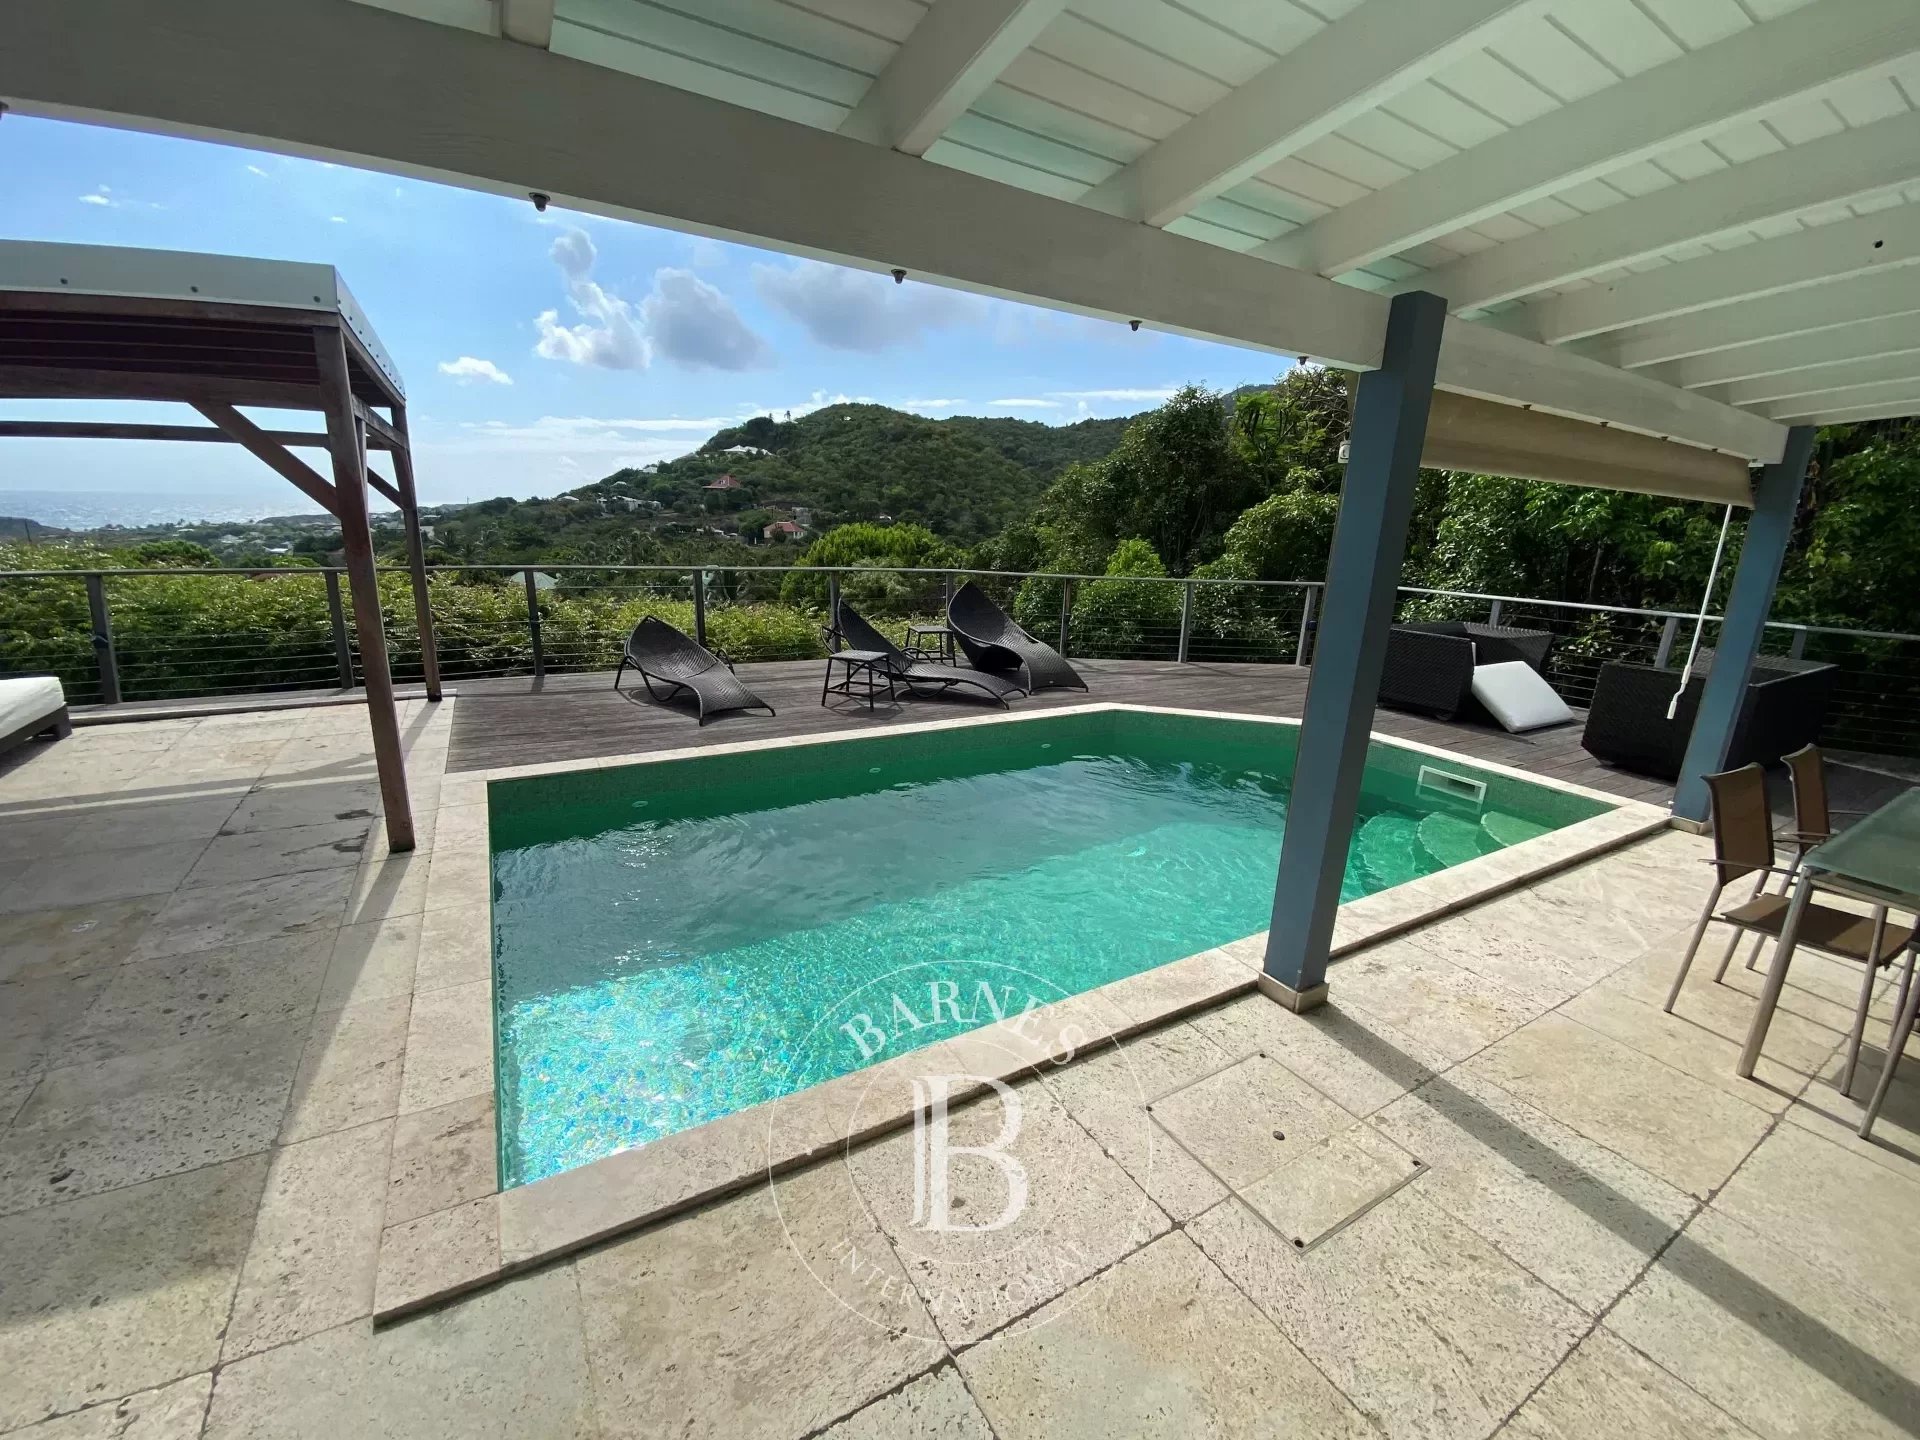 6-bedroom property in St.Barths - picture 2 title=